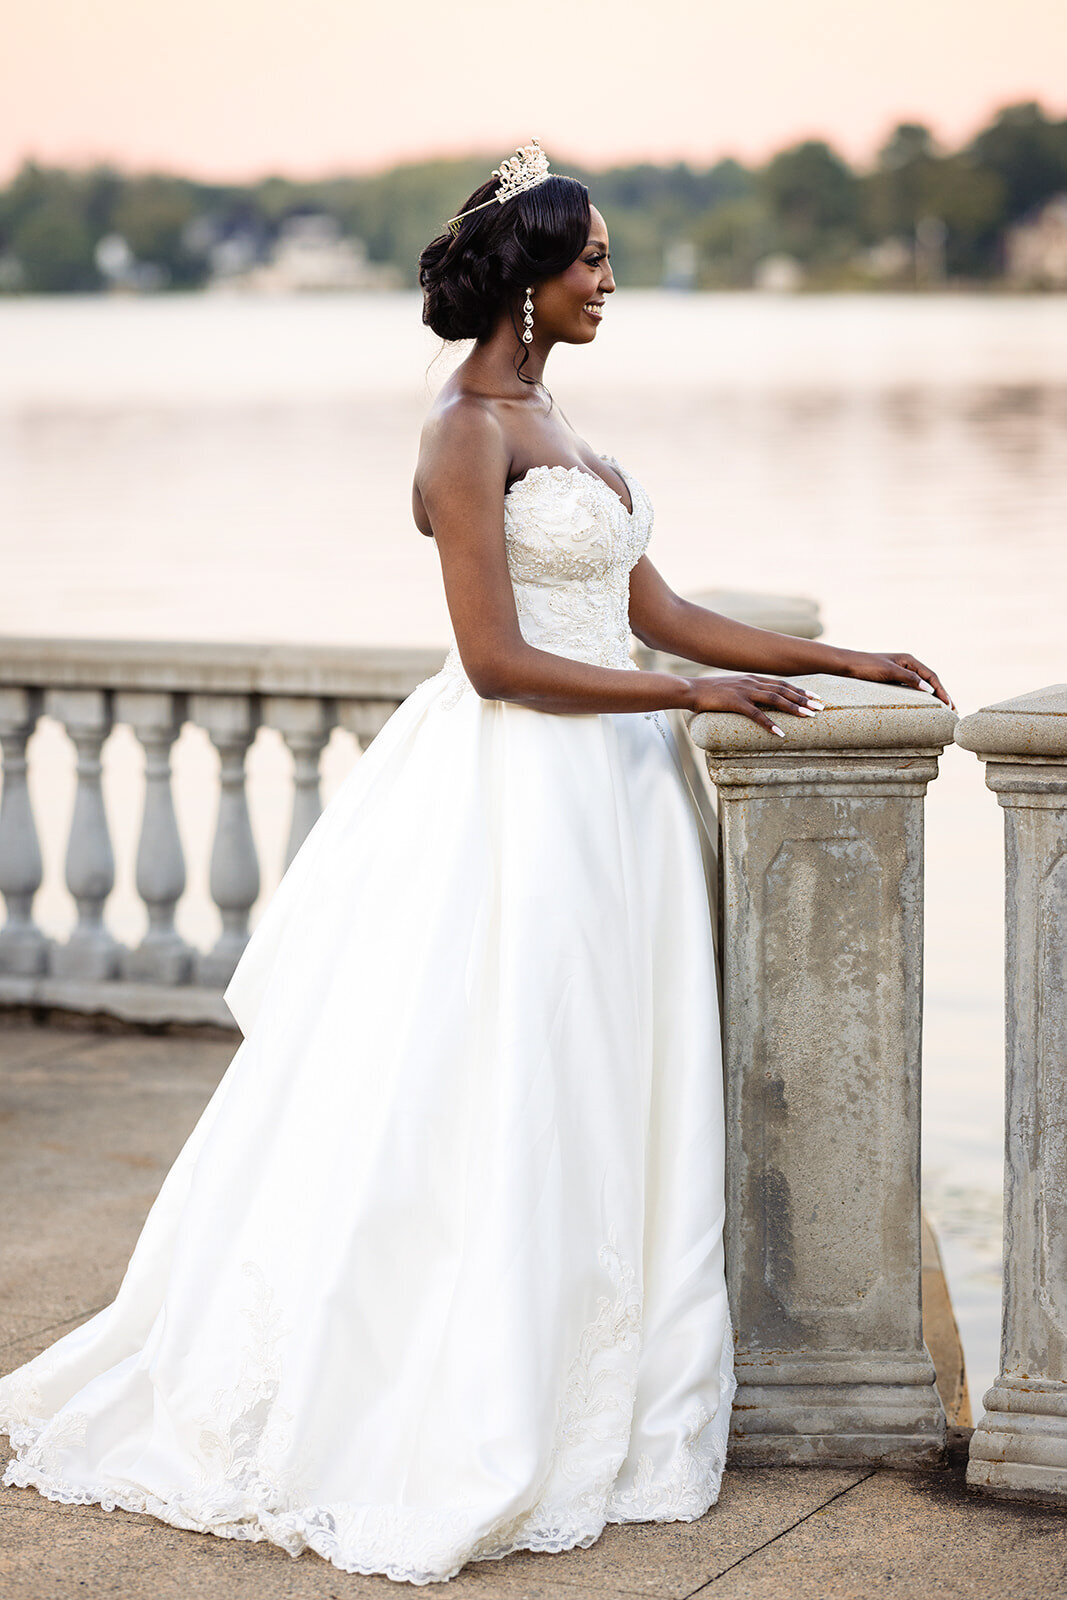 Bride in a strapless wedding gown with a tiara, gazing out over a lake at sunset